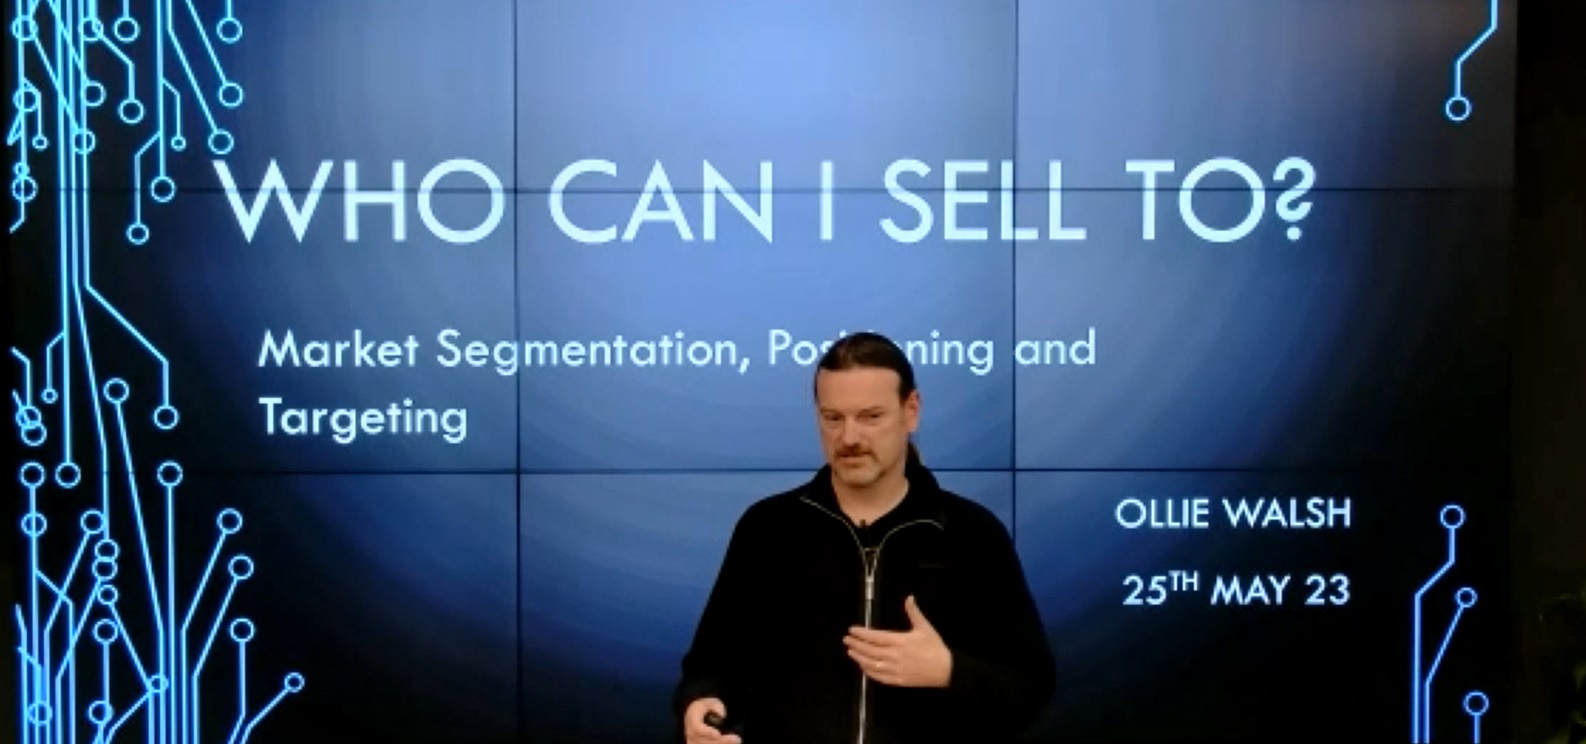 Presentation on 'Who Can I Sell to?'